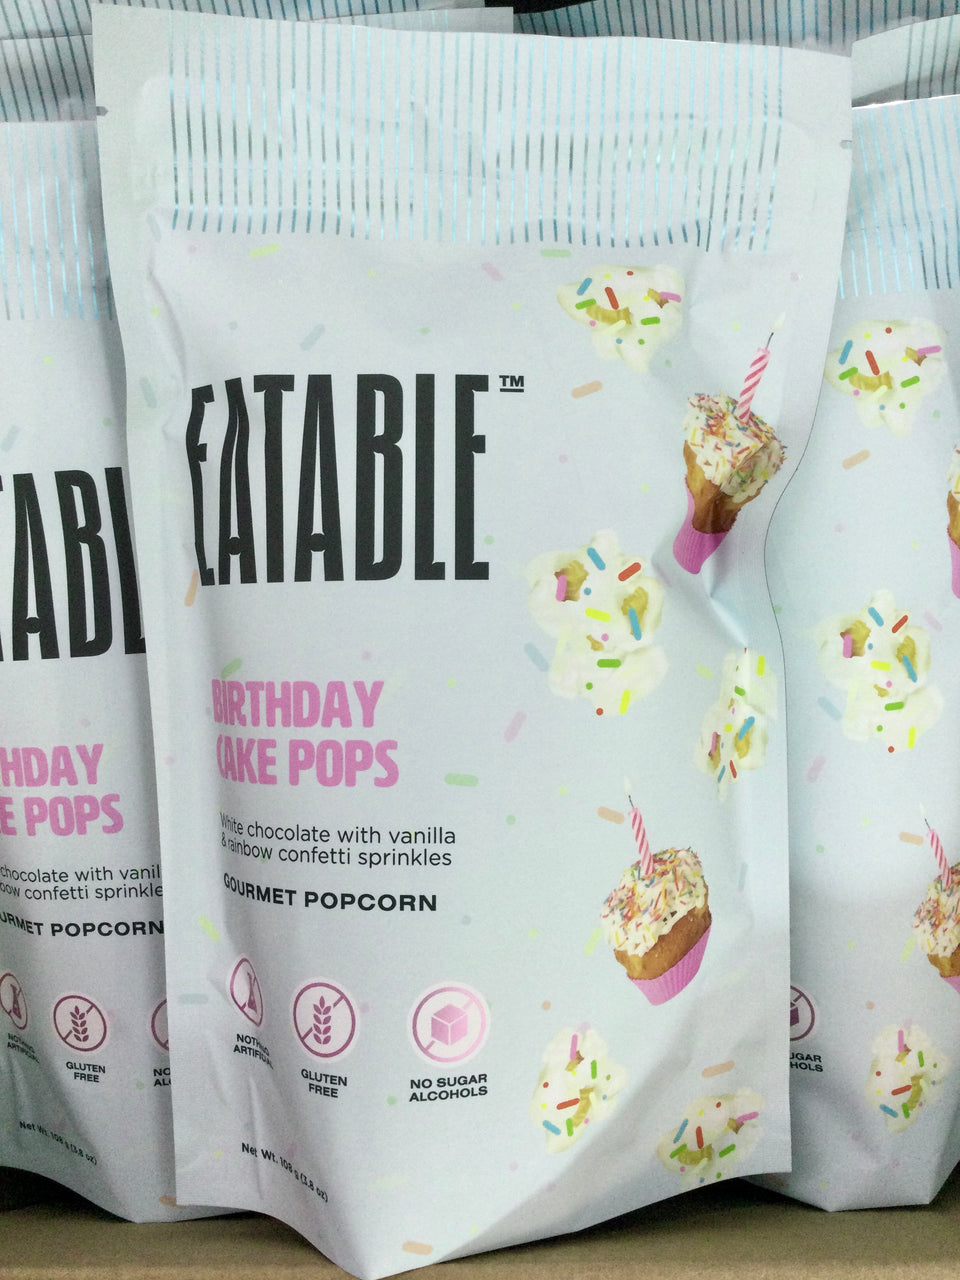 Packages of Birthday Cake Pop flavored popcorn